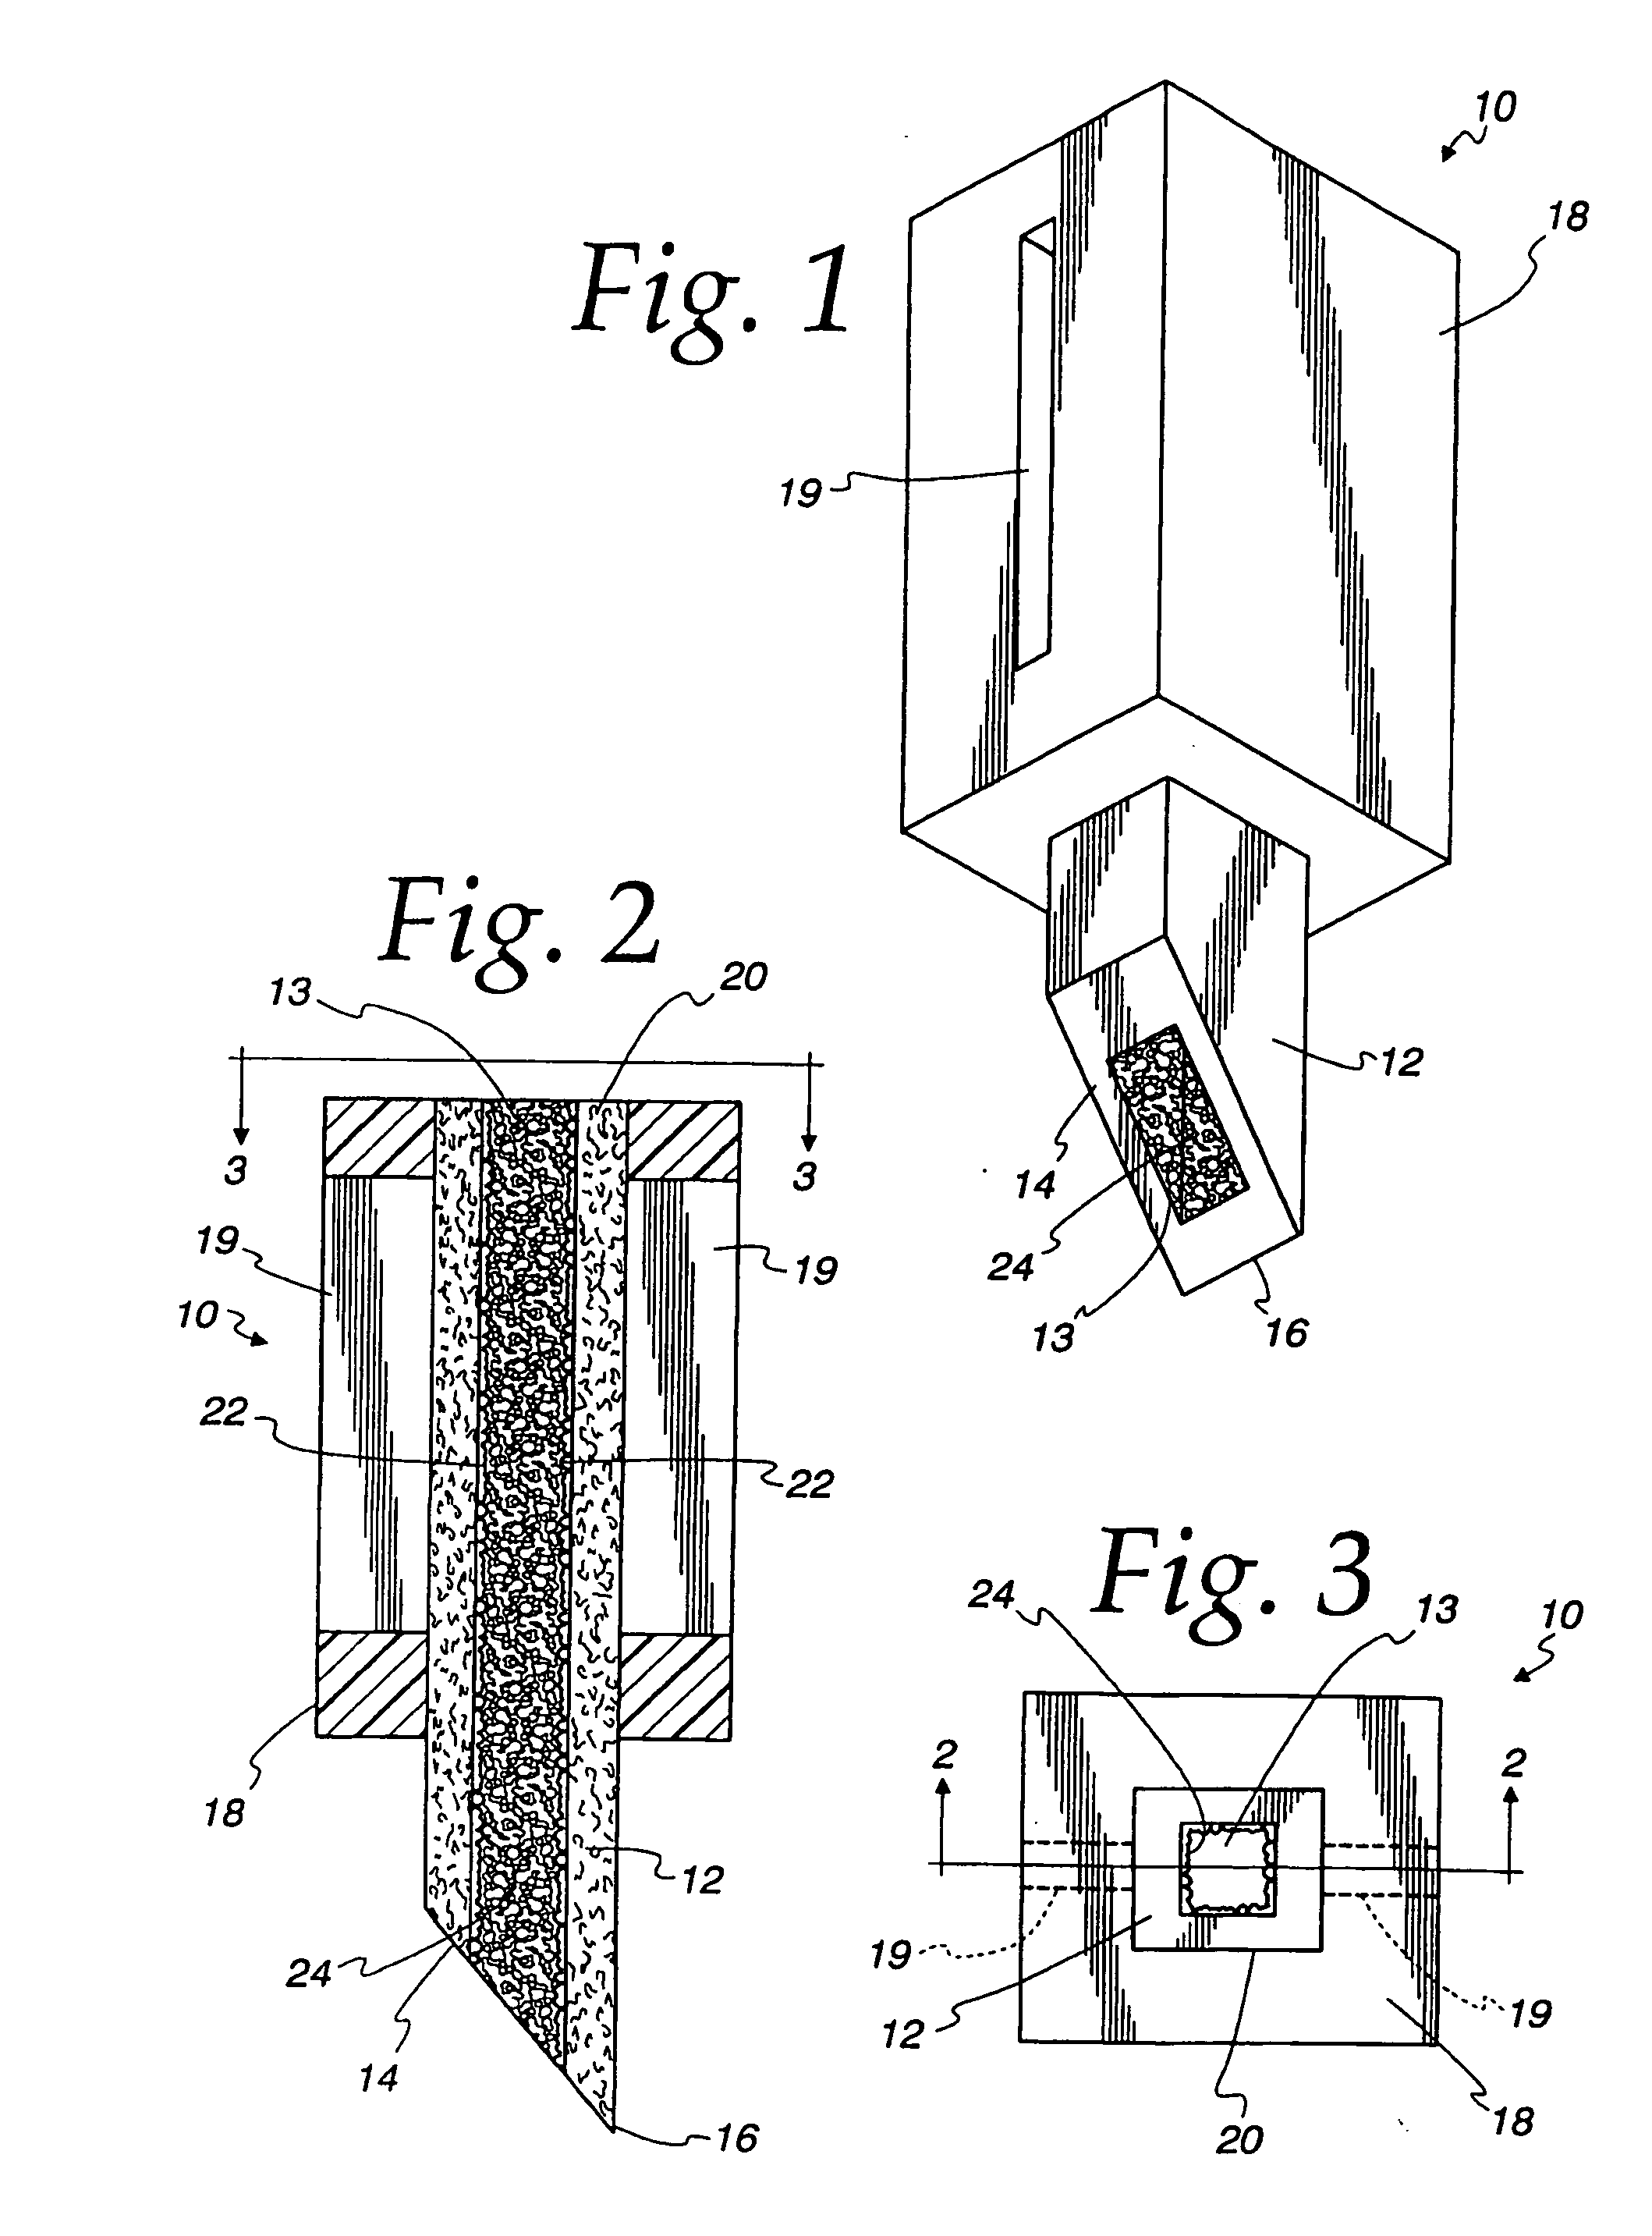 Minimum invasive optical format with integrated lance